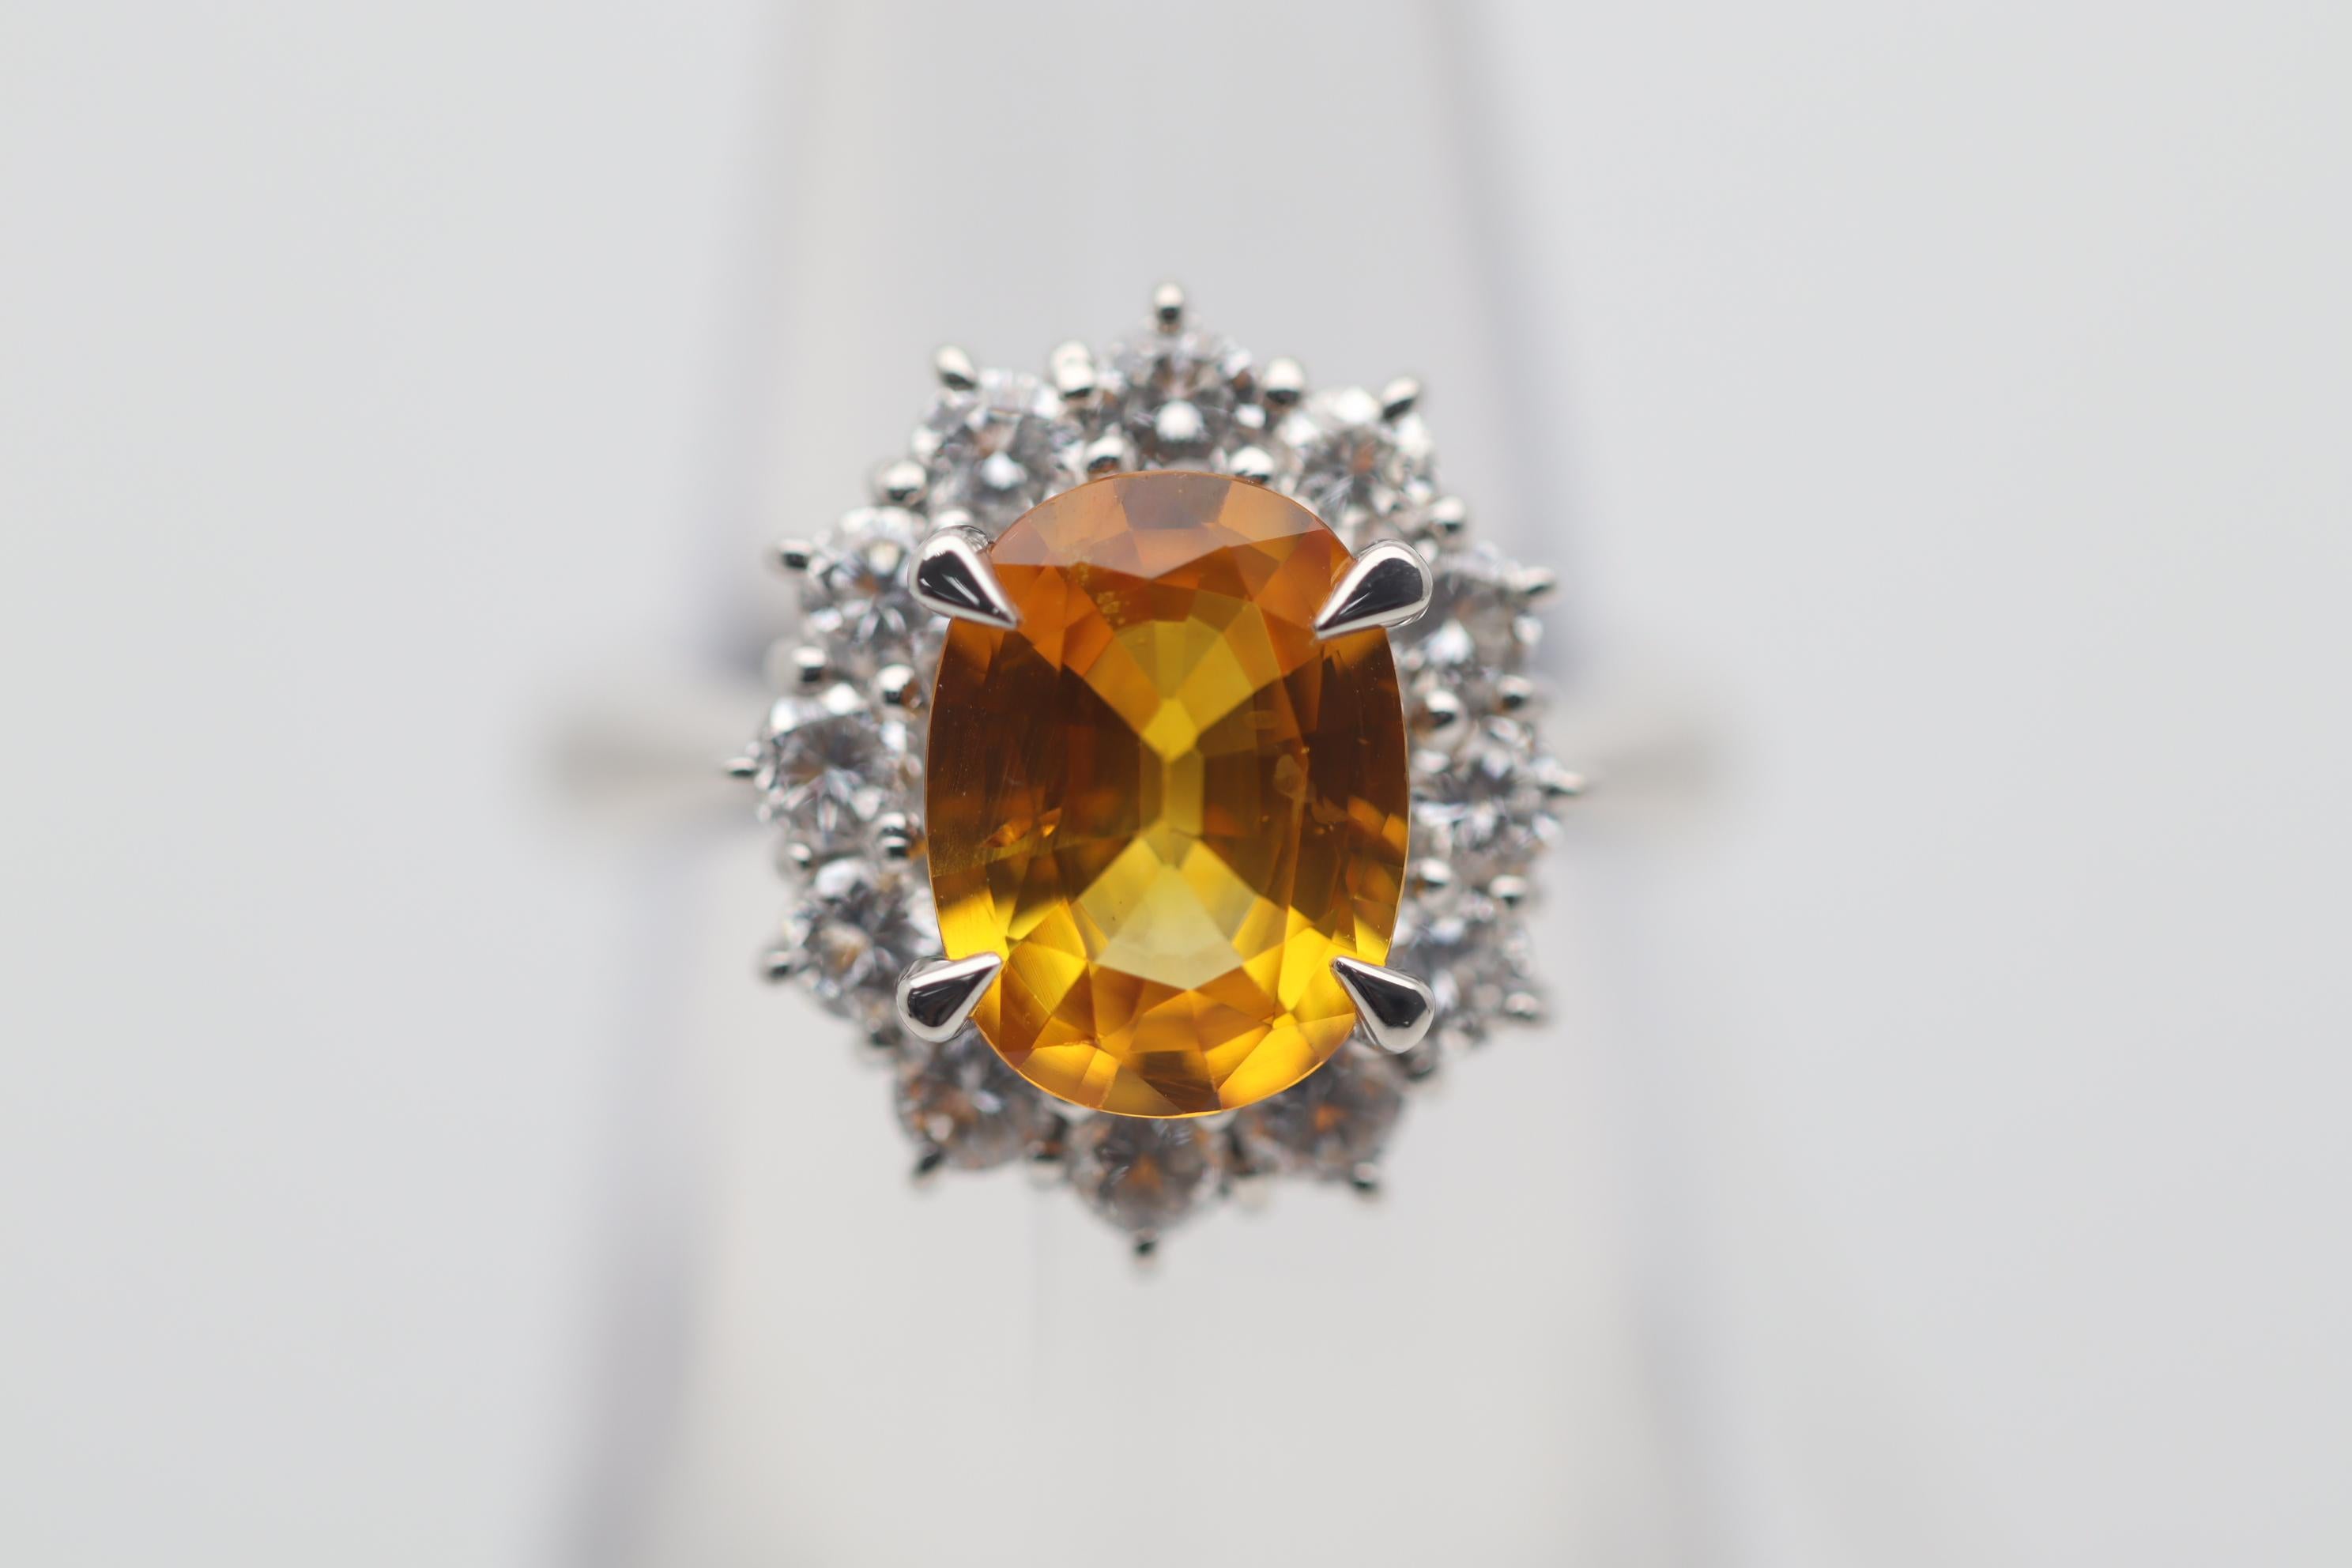 A beautiful ring featuring a bright golden orange sapphire weighing 2.54 carats. It has an intense slightly yellowish but orange color that glows in the light. It is complemented by 0.90 carats of bright white round brilliant-cut diamonds which are